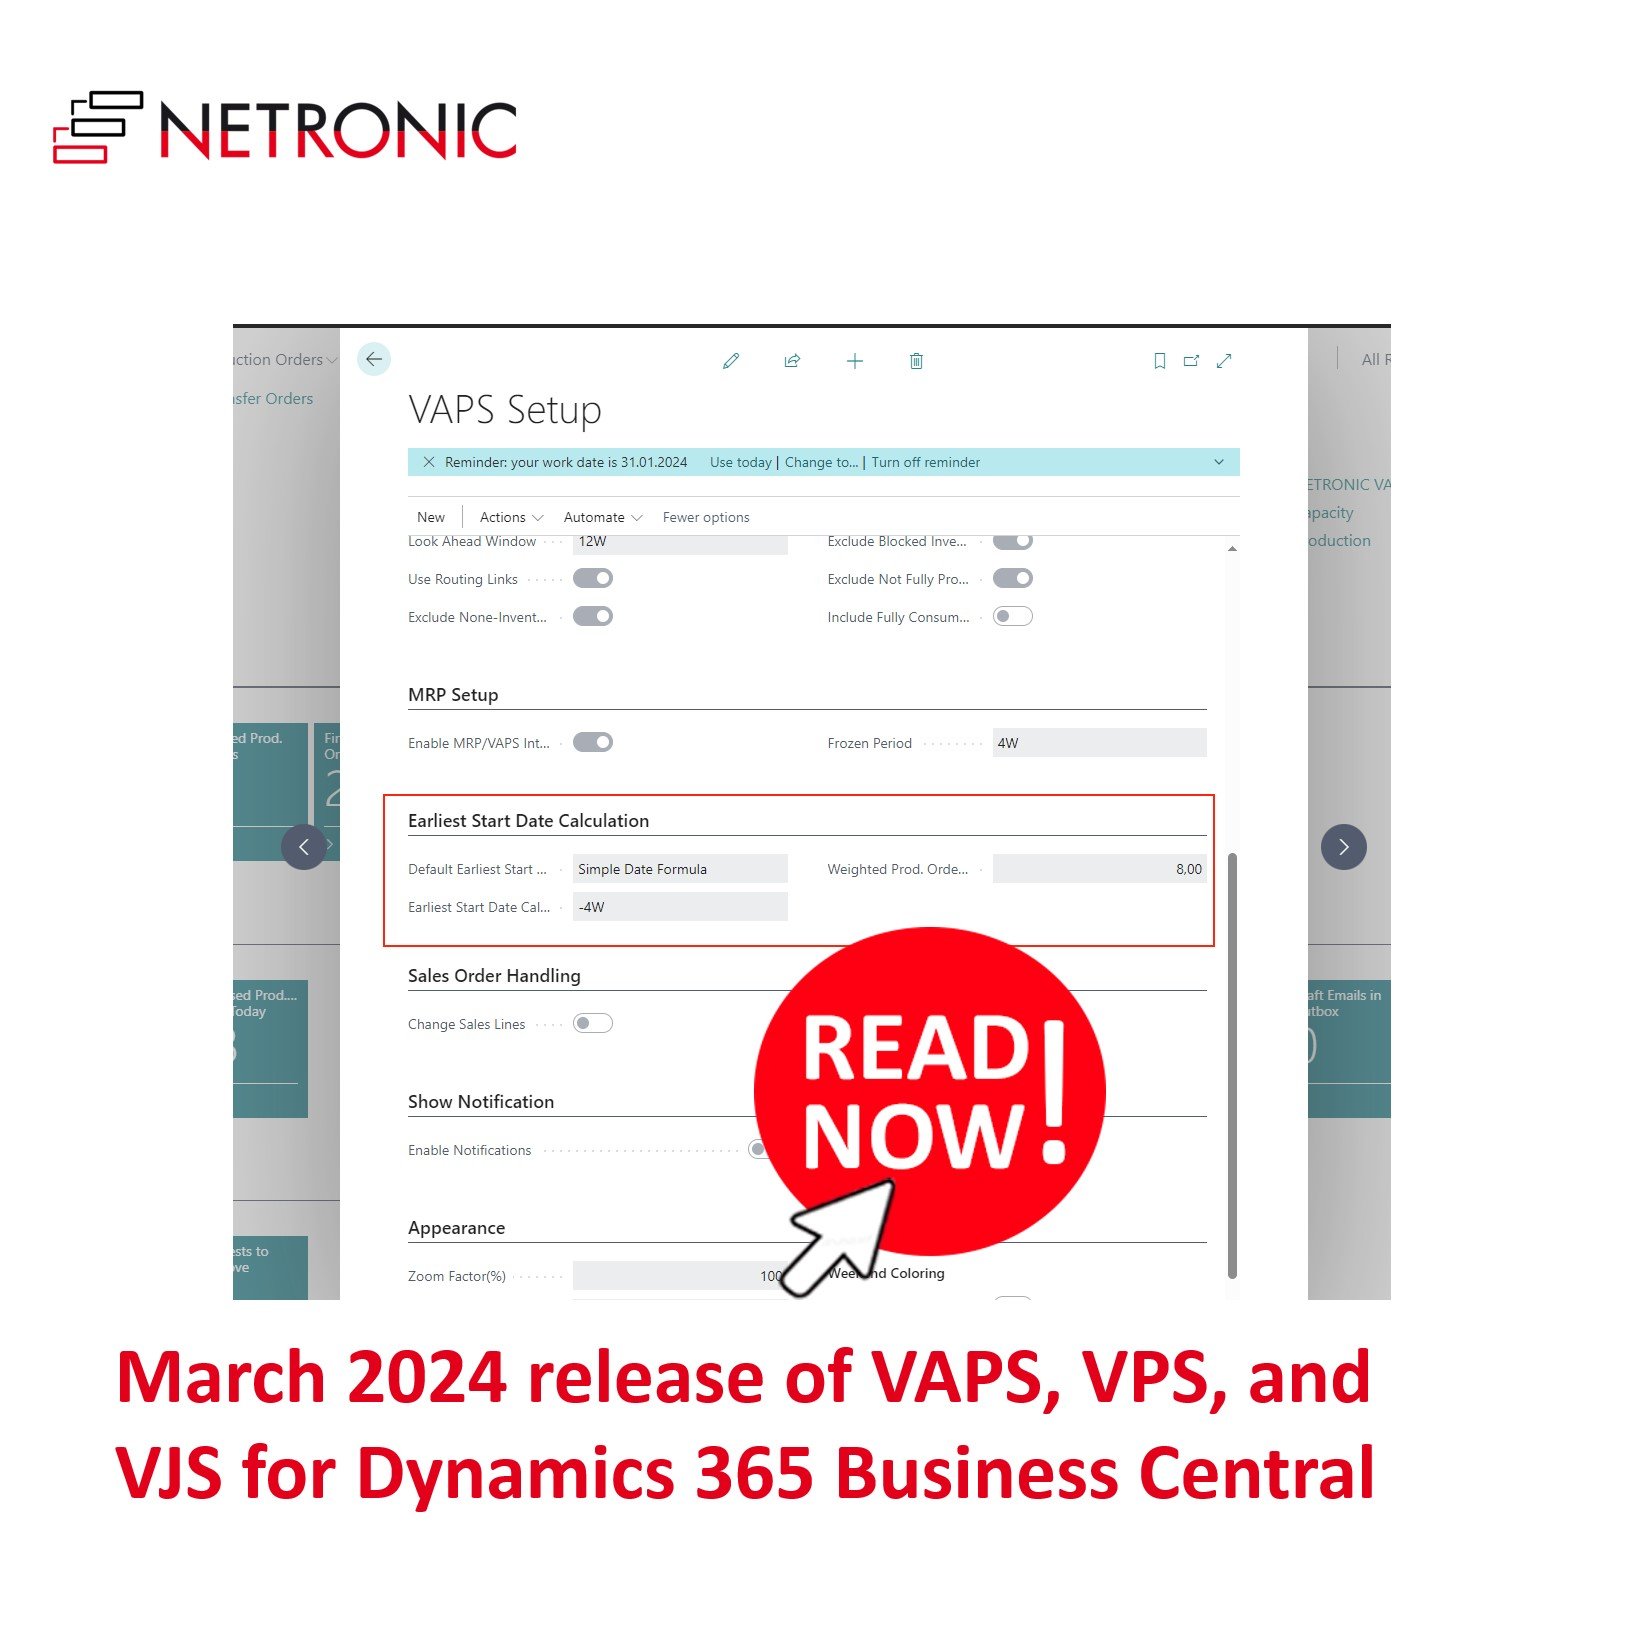 March 2024 release of VAPS, VPS and VJS for Business Central